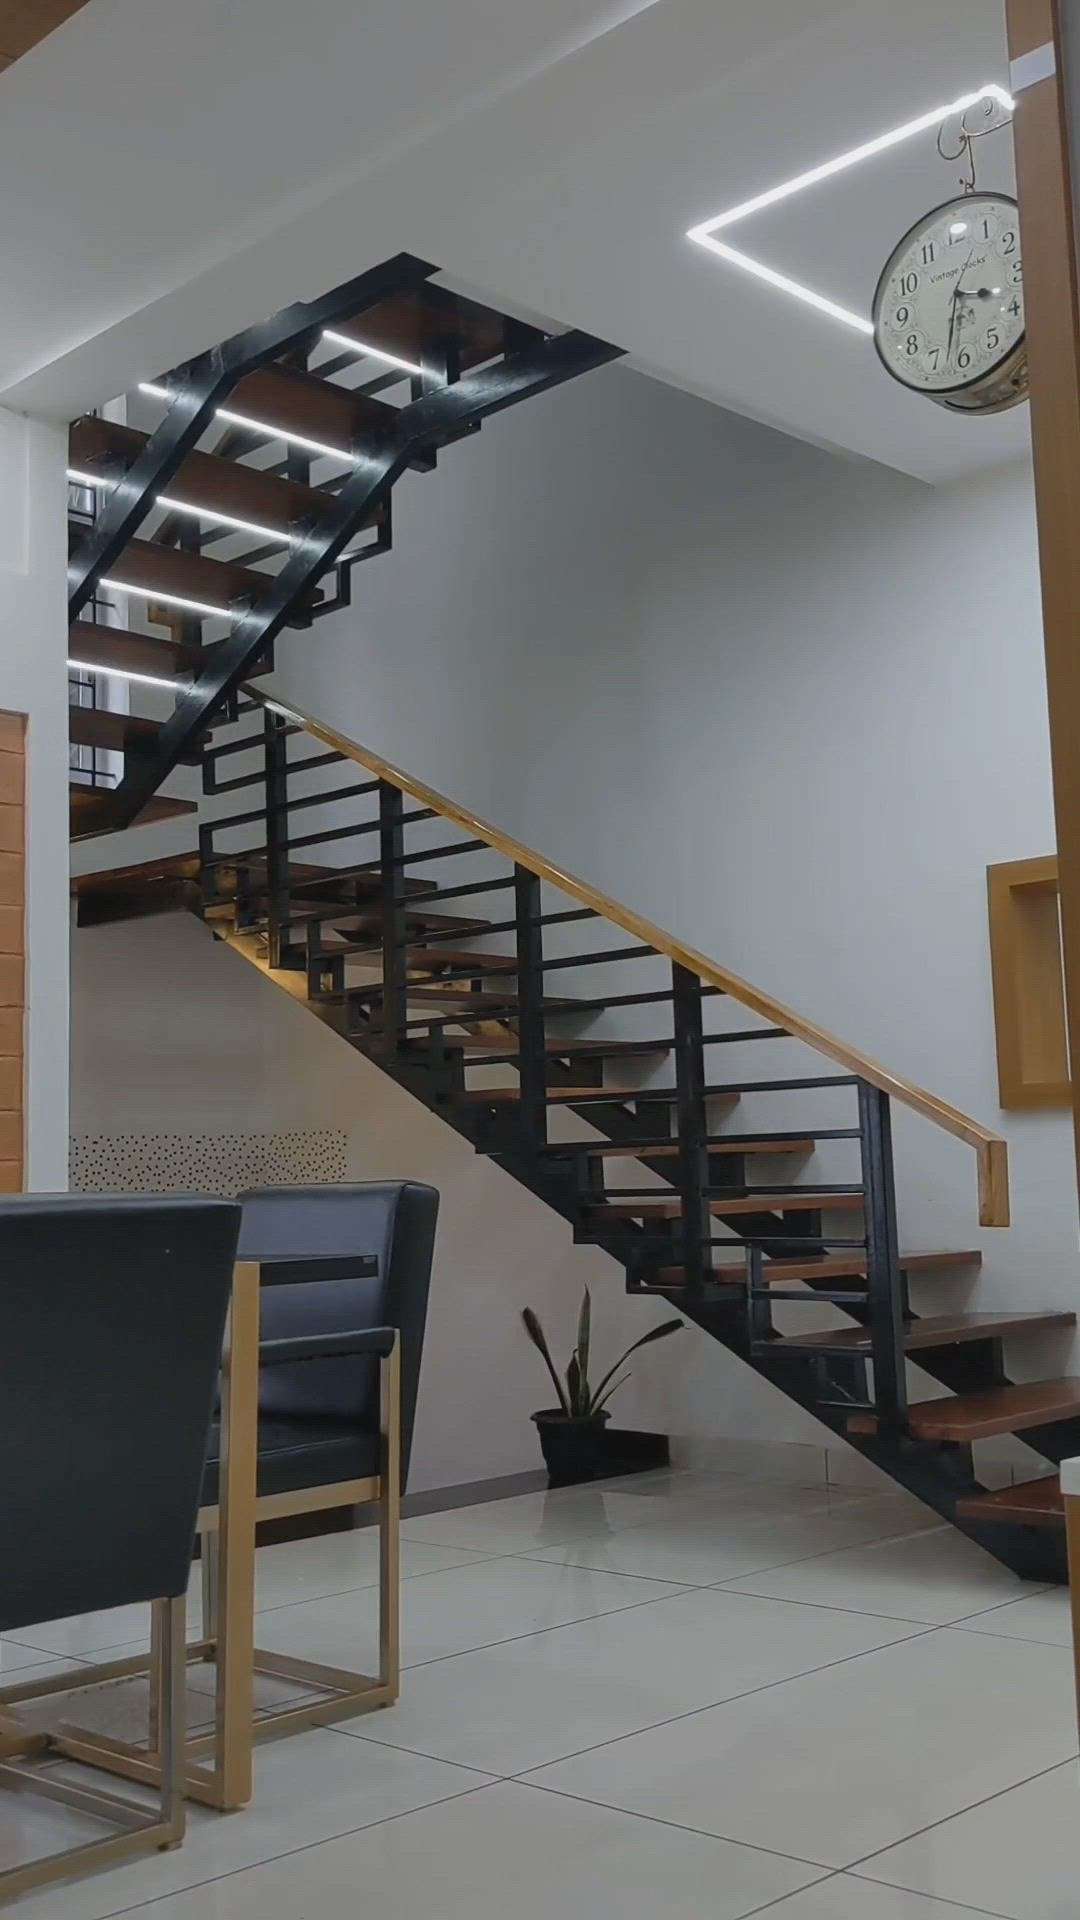 Stair with Automatic Motion Sensor Lights...✨💫
#hometour #staircasedesign
.
.
@adornconstructions
.
.
Facebook: https://www.facebook.com/Adornconstructions/?ref=pages_you_manage
https://www.adornconstruction.com
YouTube: https://www.youtube.com/channel/UCpet1eJJCiY5ymY8ddv1Dcg.
.
.
#adornconstructions
#architecturedesign
#architecturephotography
#architecture
#constructions
#keralagram
#palakkad
#kerala
#haash
#haash_fbk💟
#haash_6pm9pm💟
#haash_all💟
#instadaily
#instagram
#InteriorDesigner